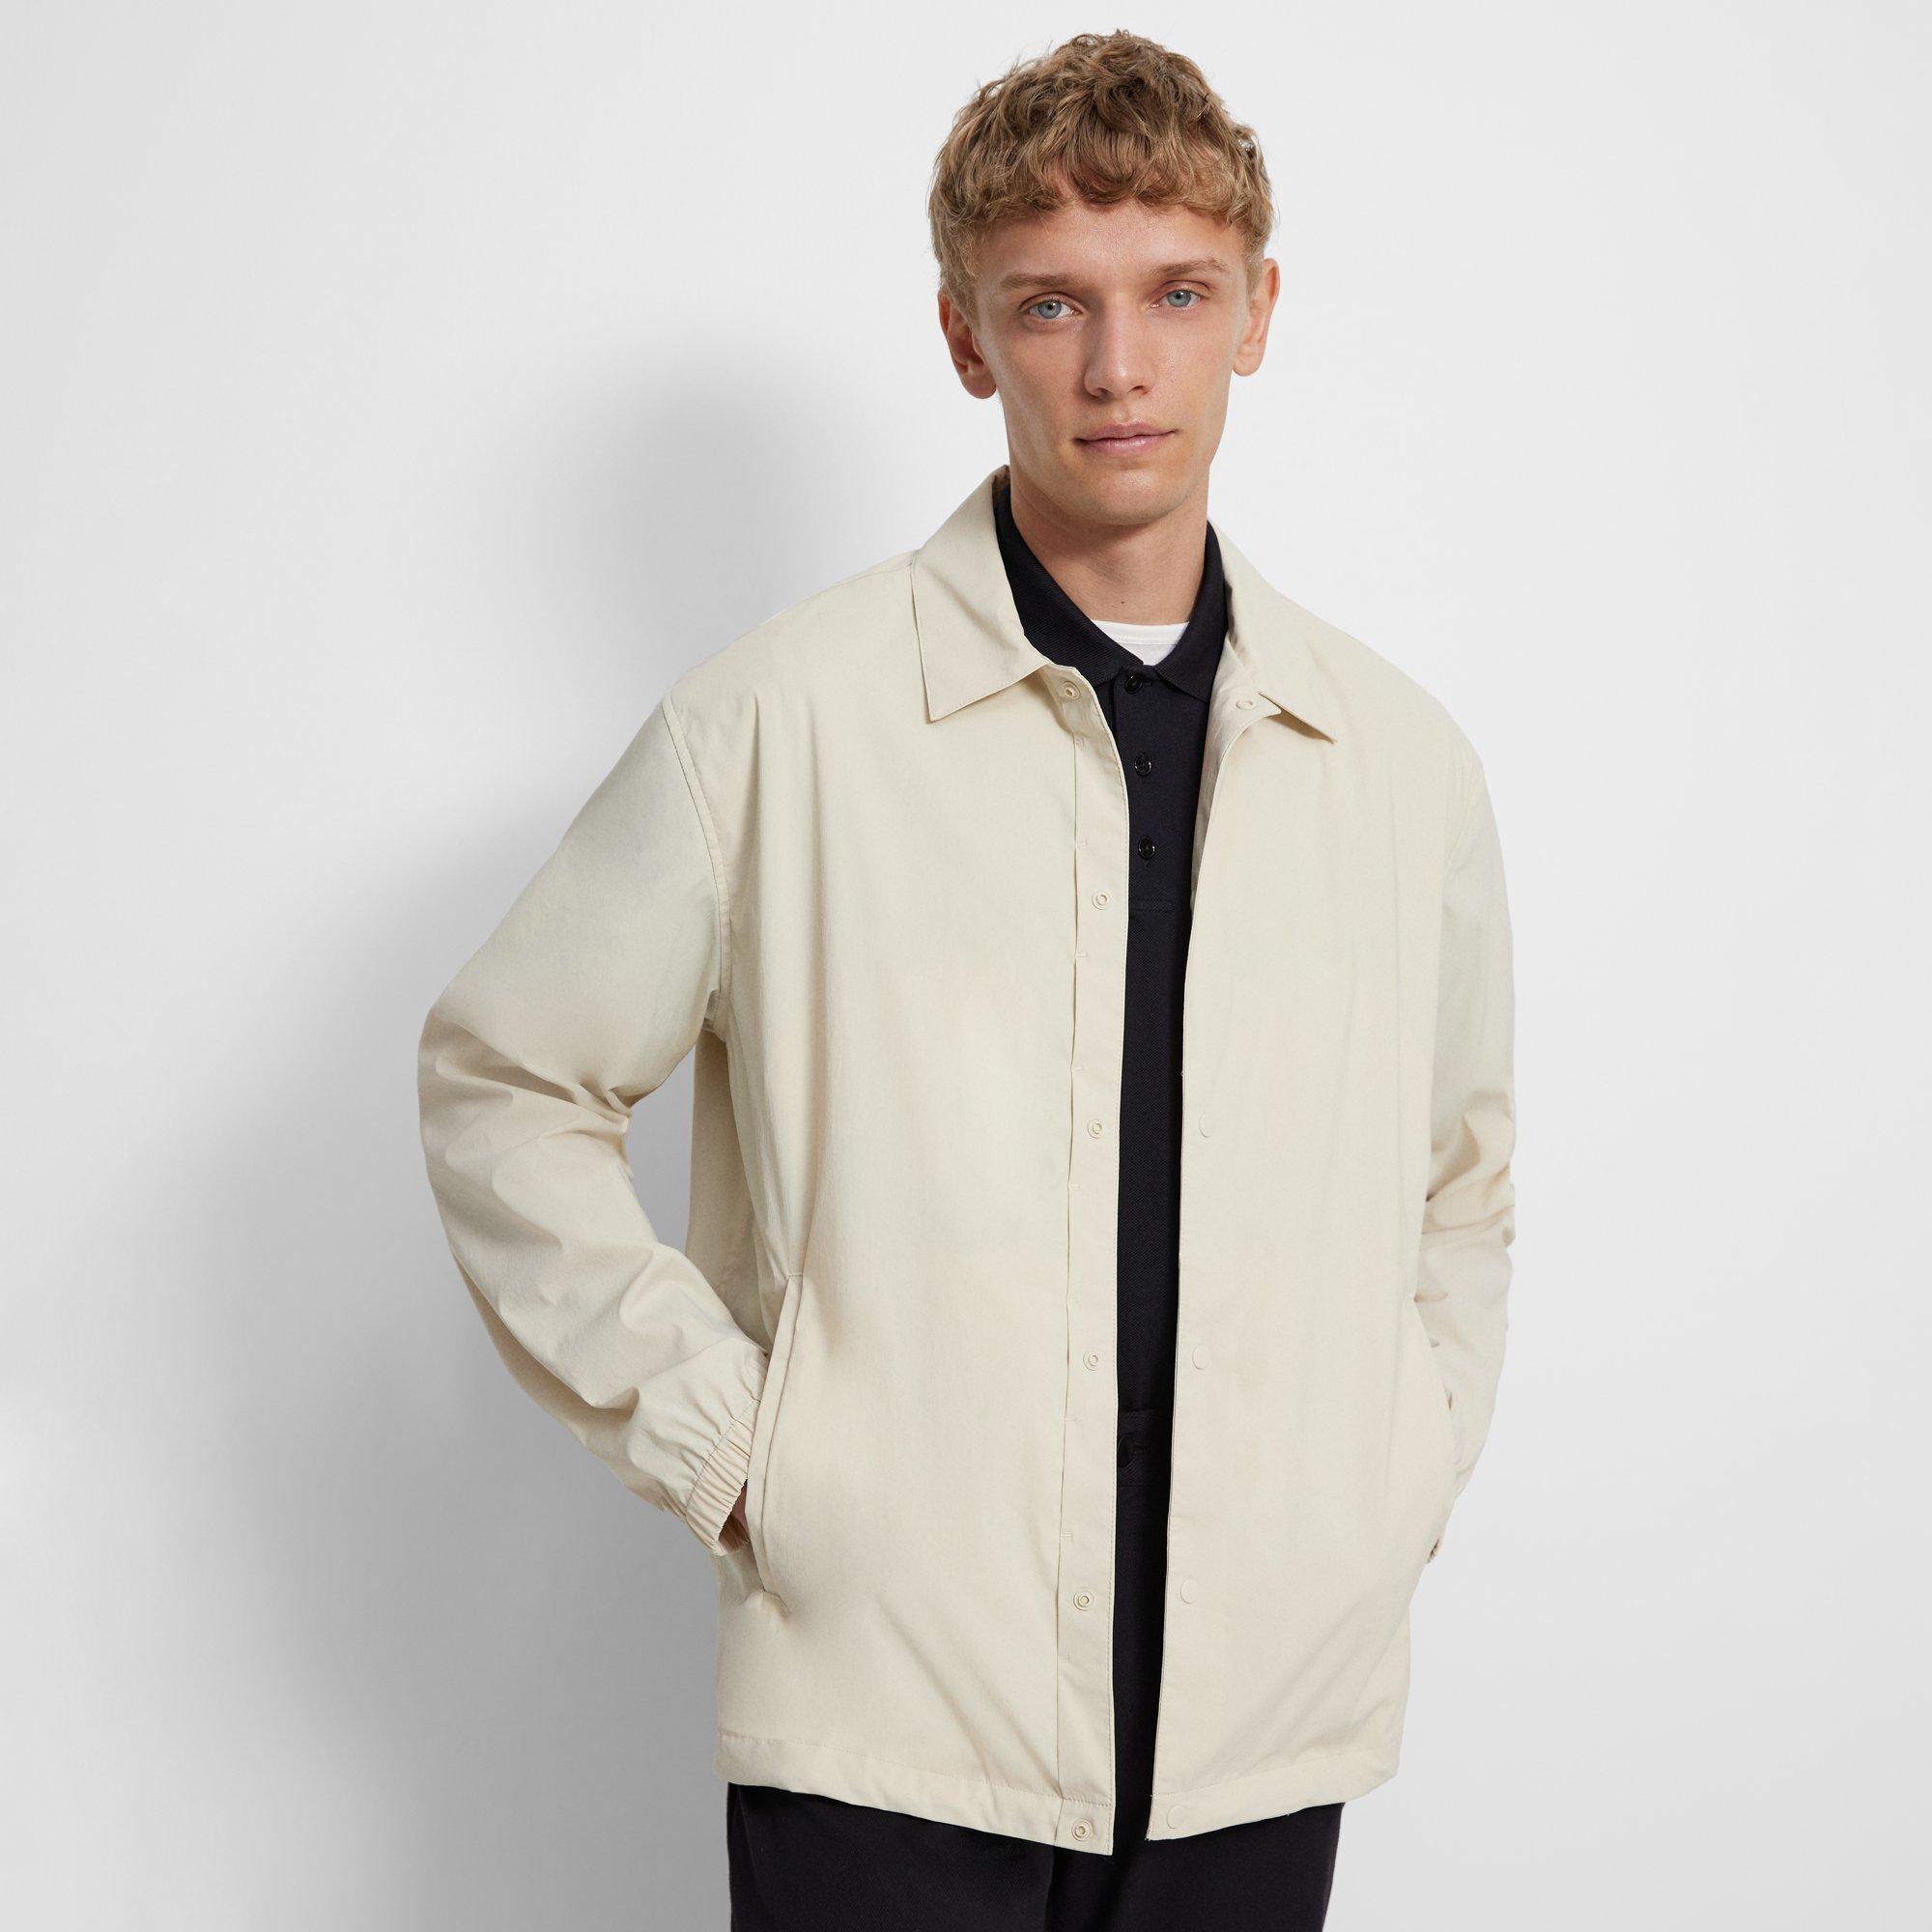 Men's Coats and Jackets | Theory UK Official Site